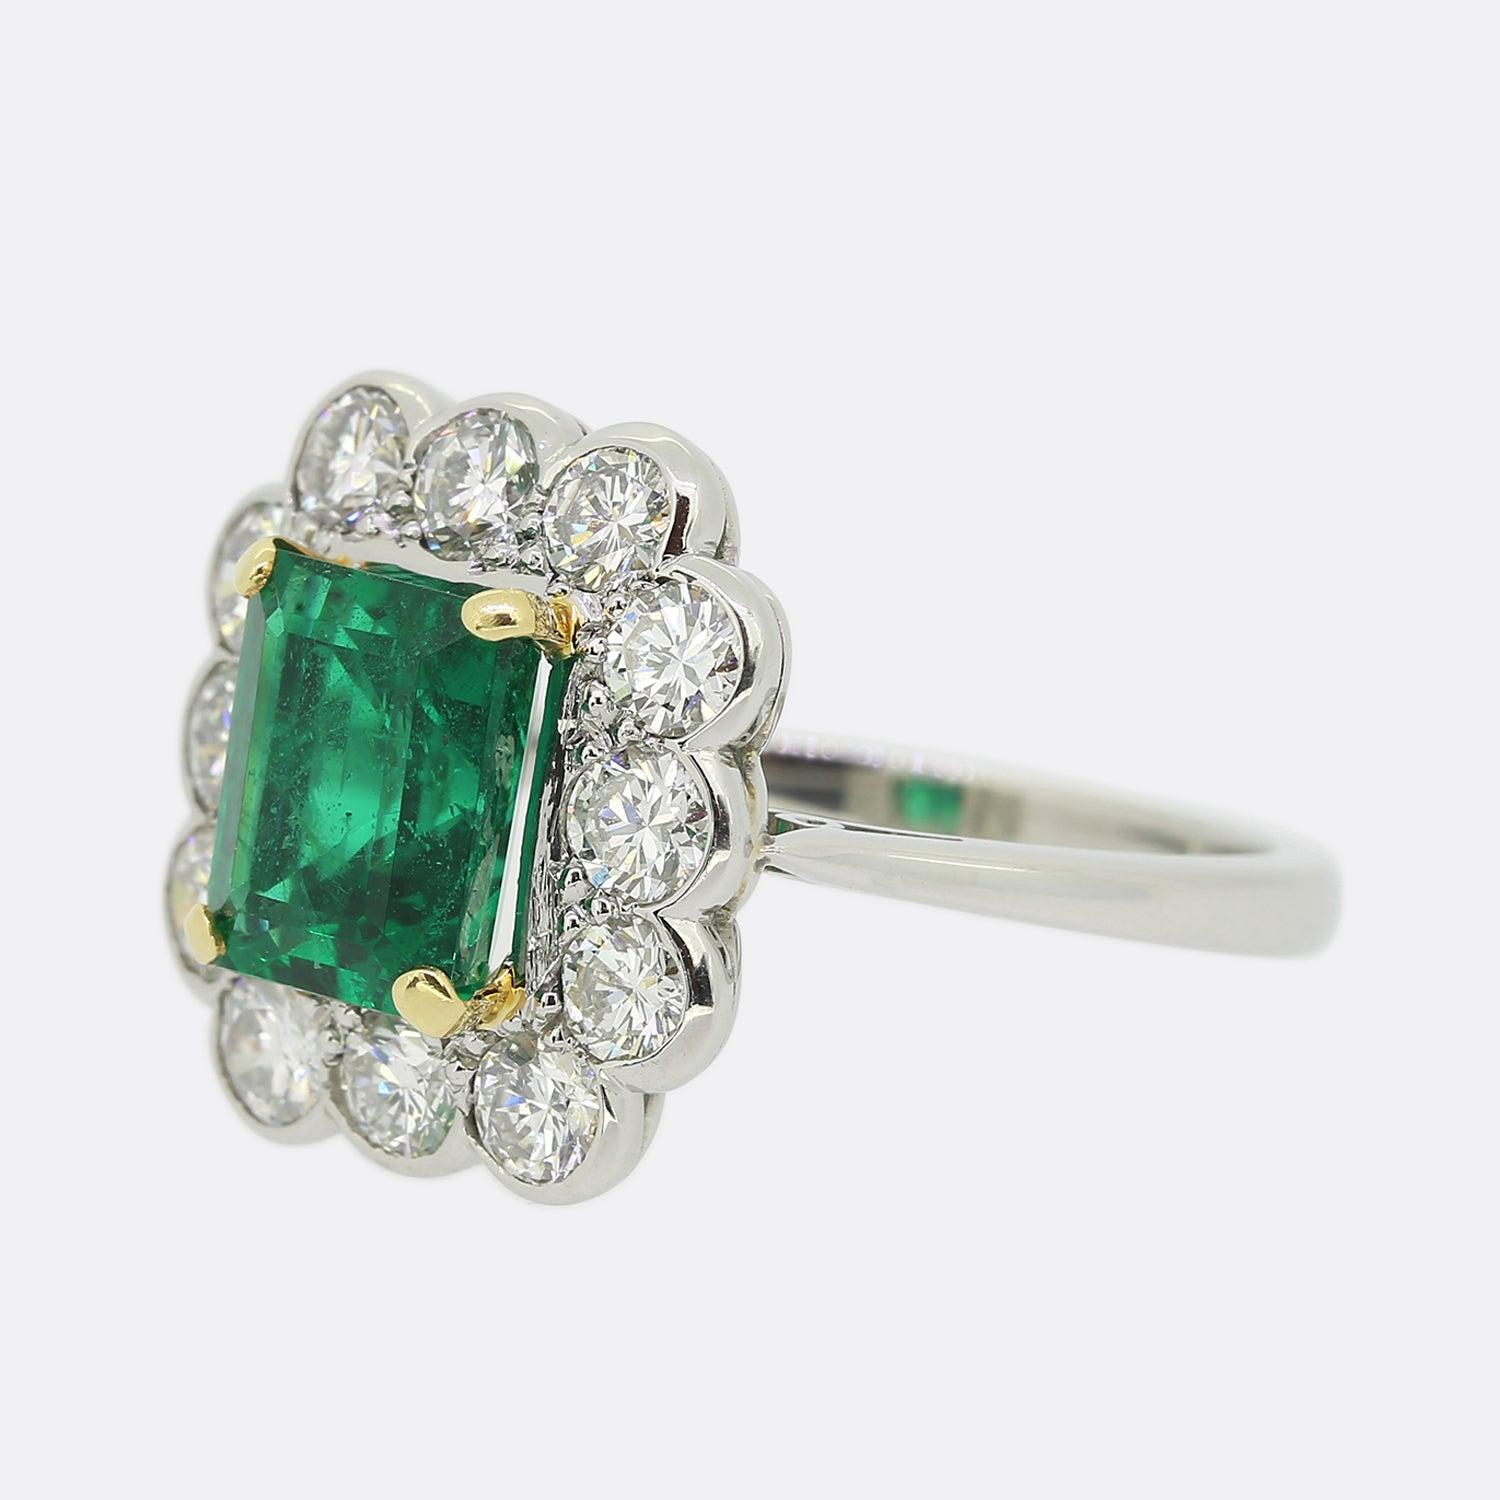 This is a wonderful emerald and diamond cluster ring. The ring features a central emerald cut Zambian emerald which possesses a beautifully intense green tone which is highly complimented by the bright white round brilliant cut diamonds which